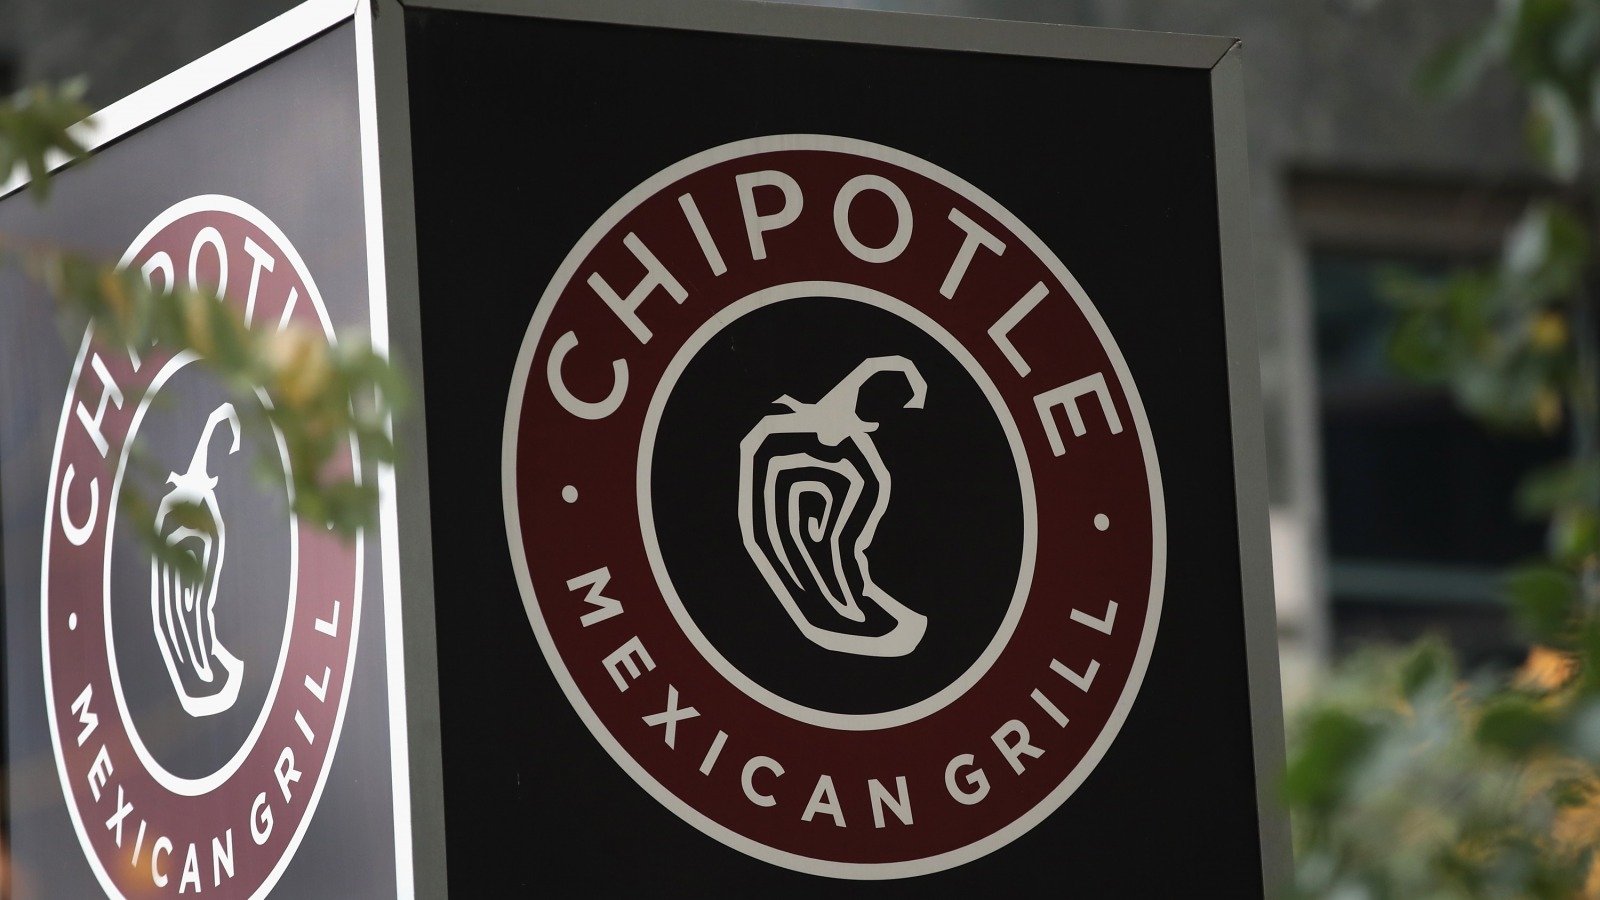 Things You Should Never Order At Chipotle